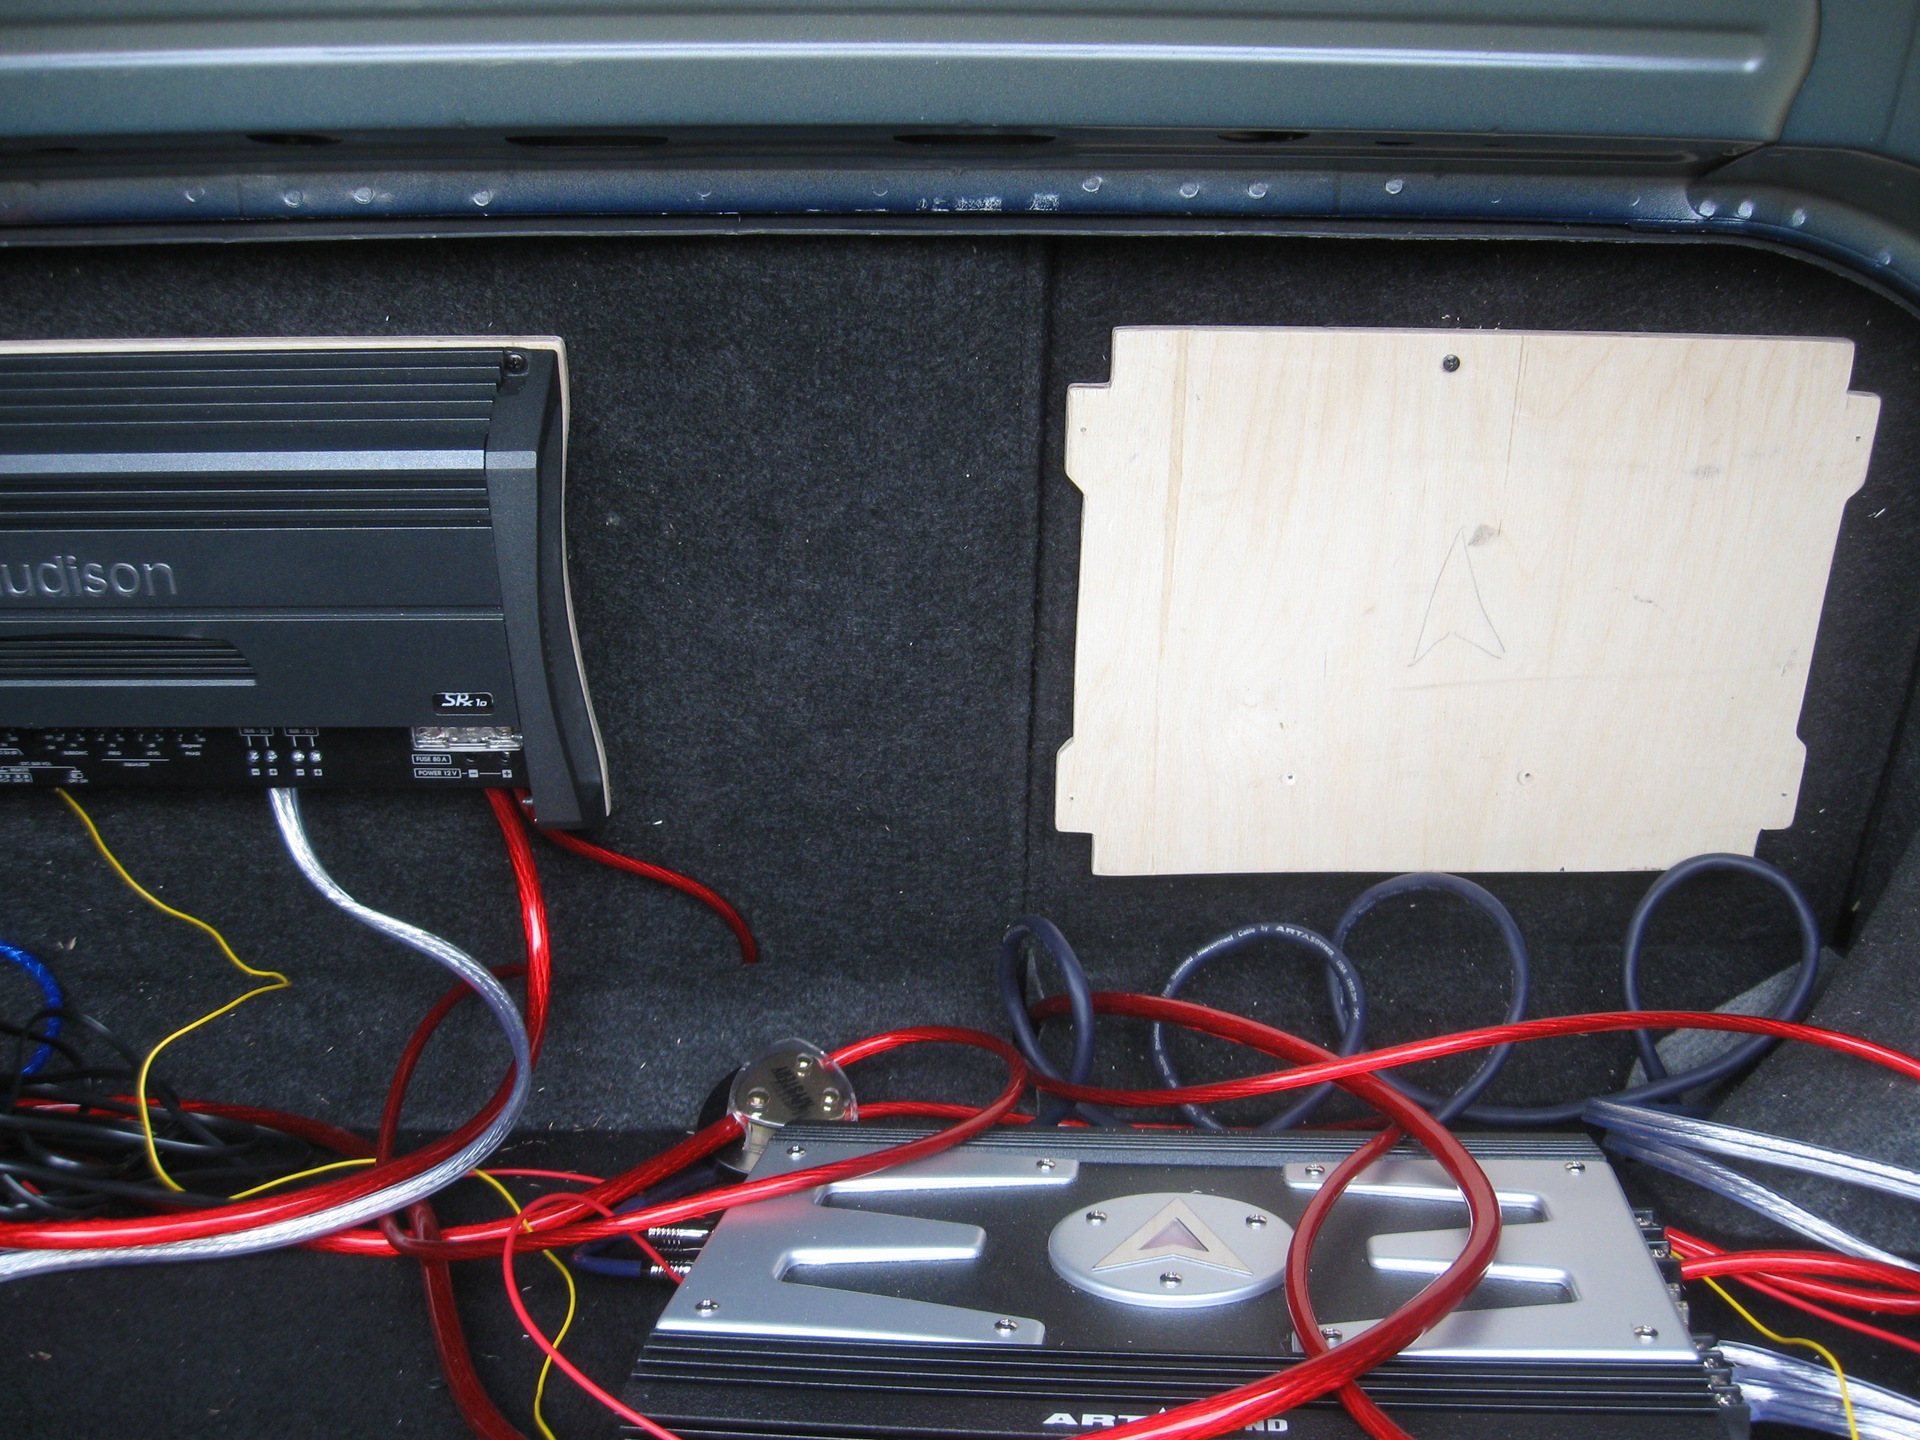 Changing the speaker system in a car - Toyota Corolla 16 liter 2005